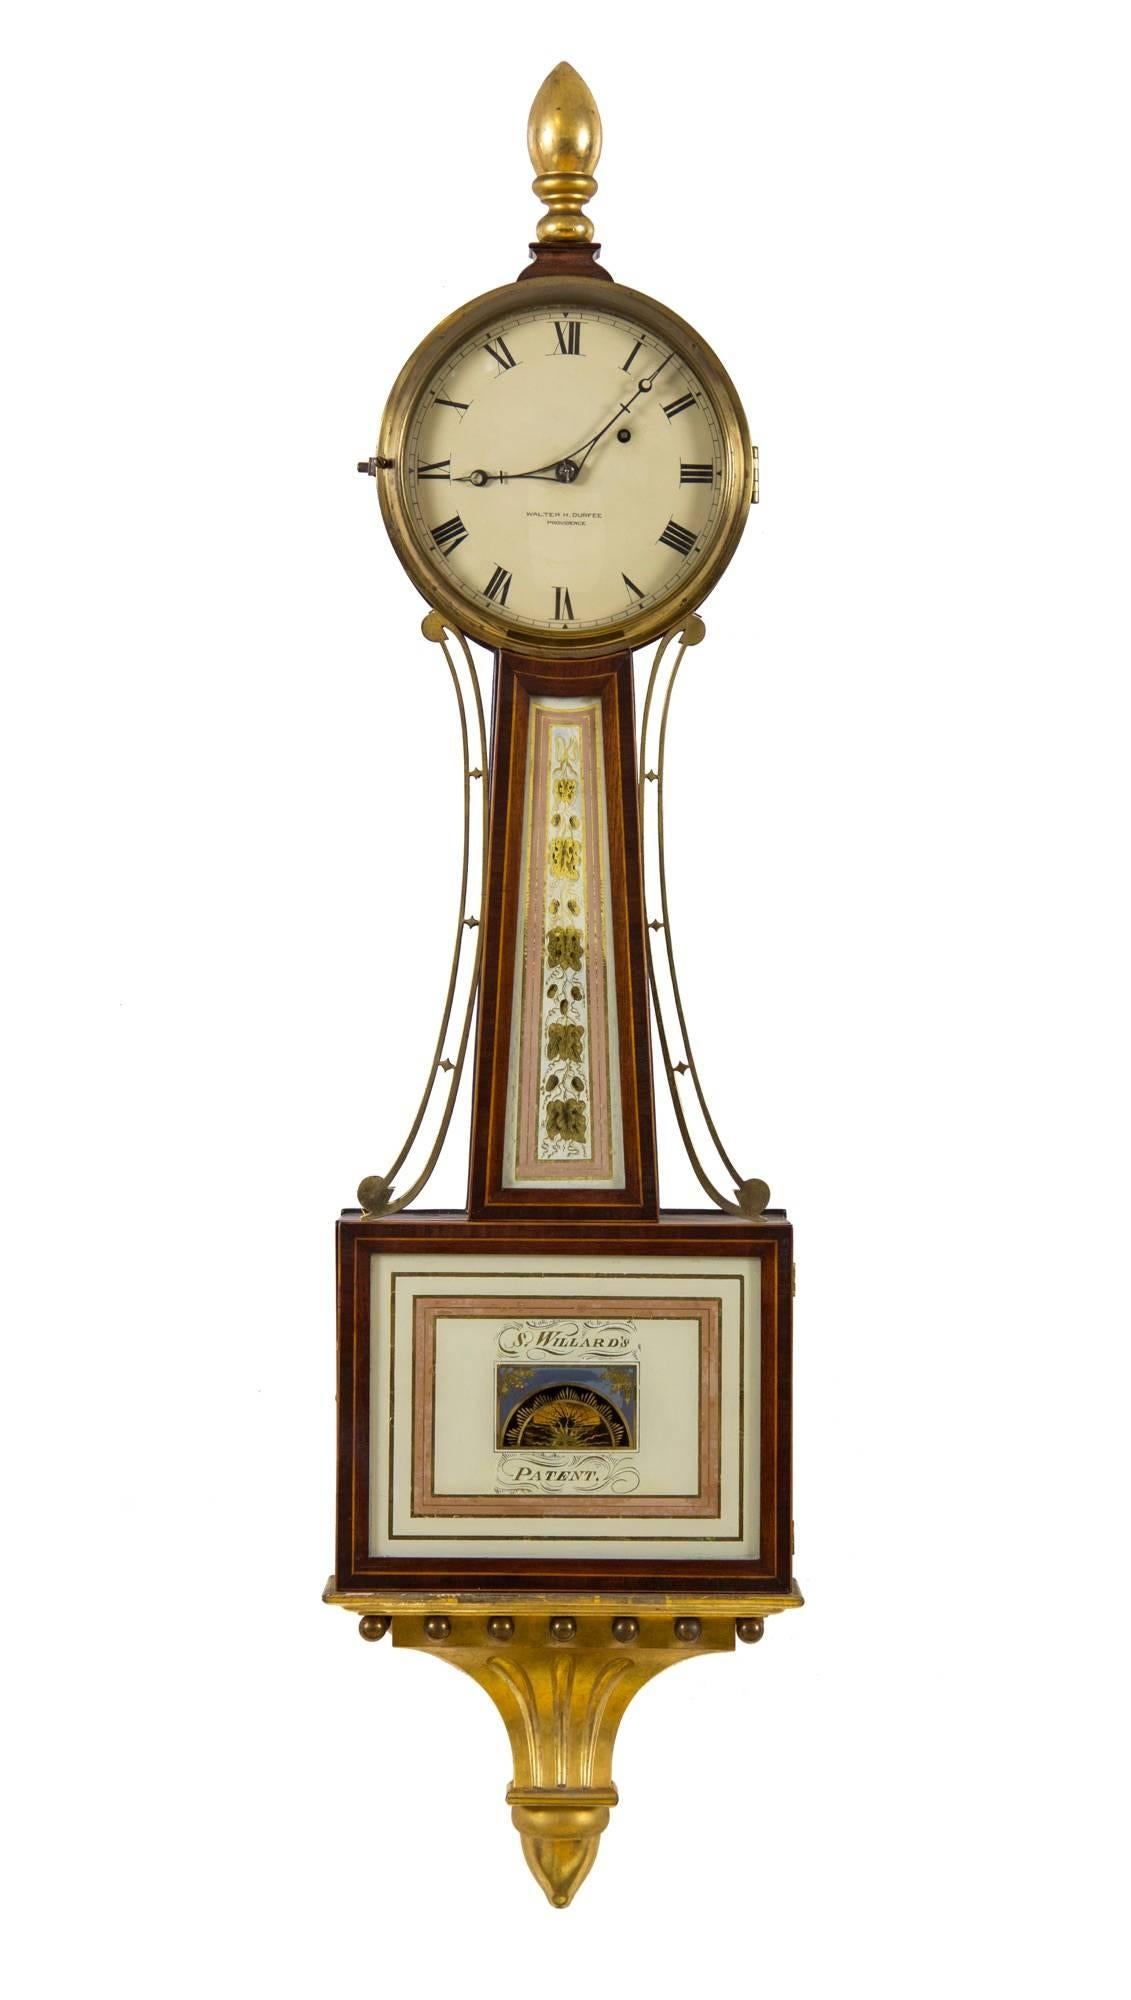 In the world of American banjo clocks, Walter Durfee produced the finest reproductions of the famous Willard timepiece. Durfee was a perfectionist and his hand is seen throughout the choice and quality of painting, wood, etc. The gold leafing is of